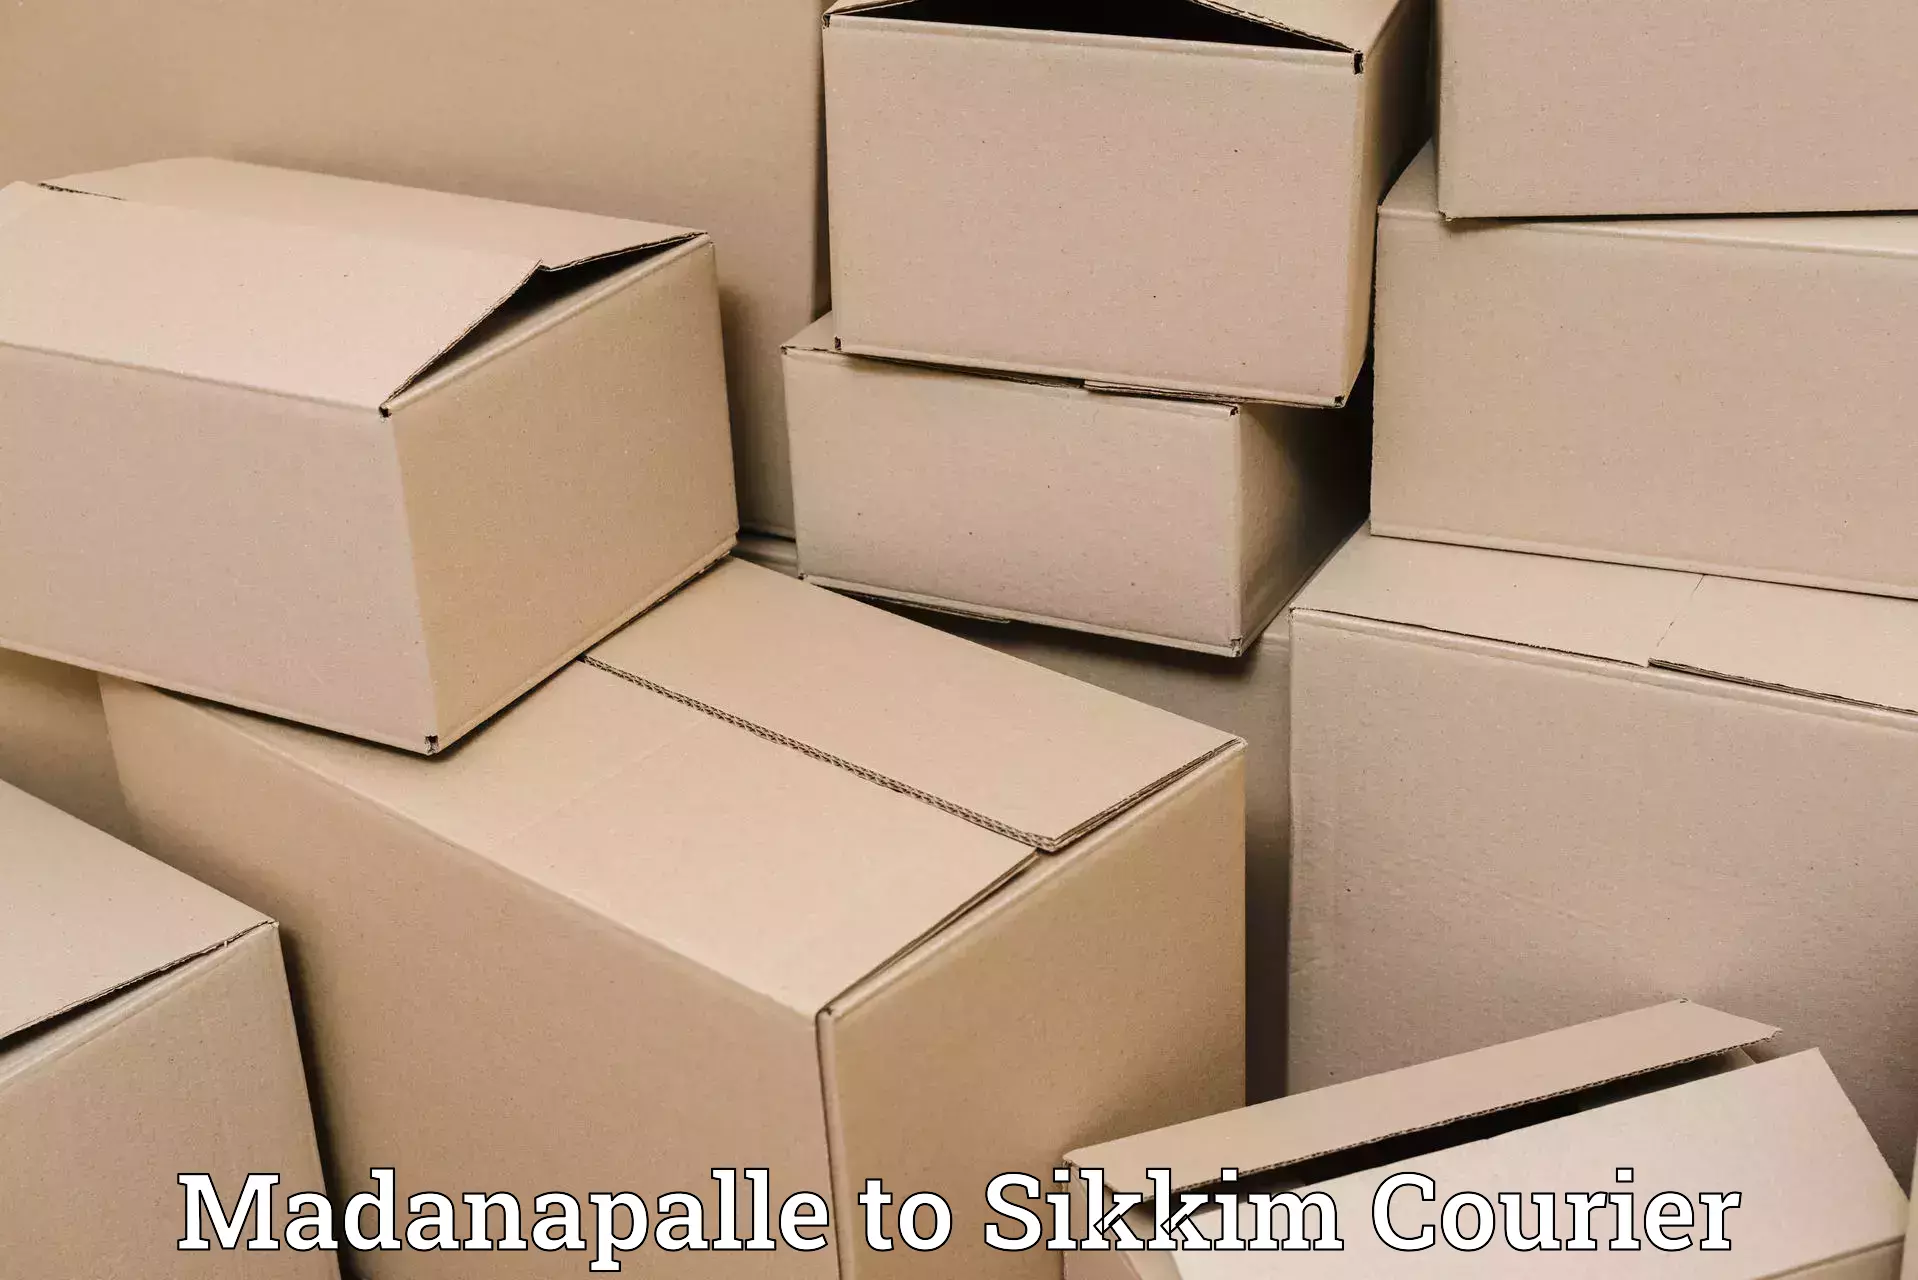 Express delivery capabilities Madanapalle to Ranipool